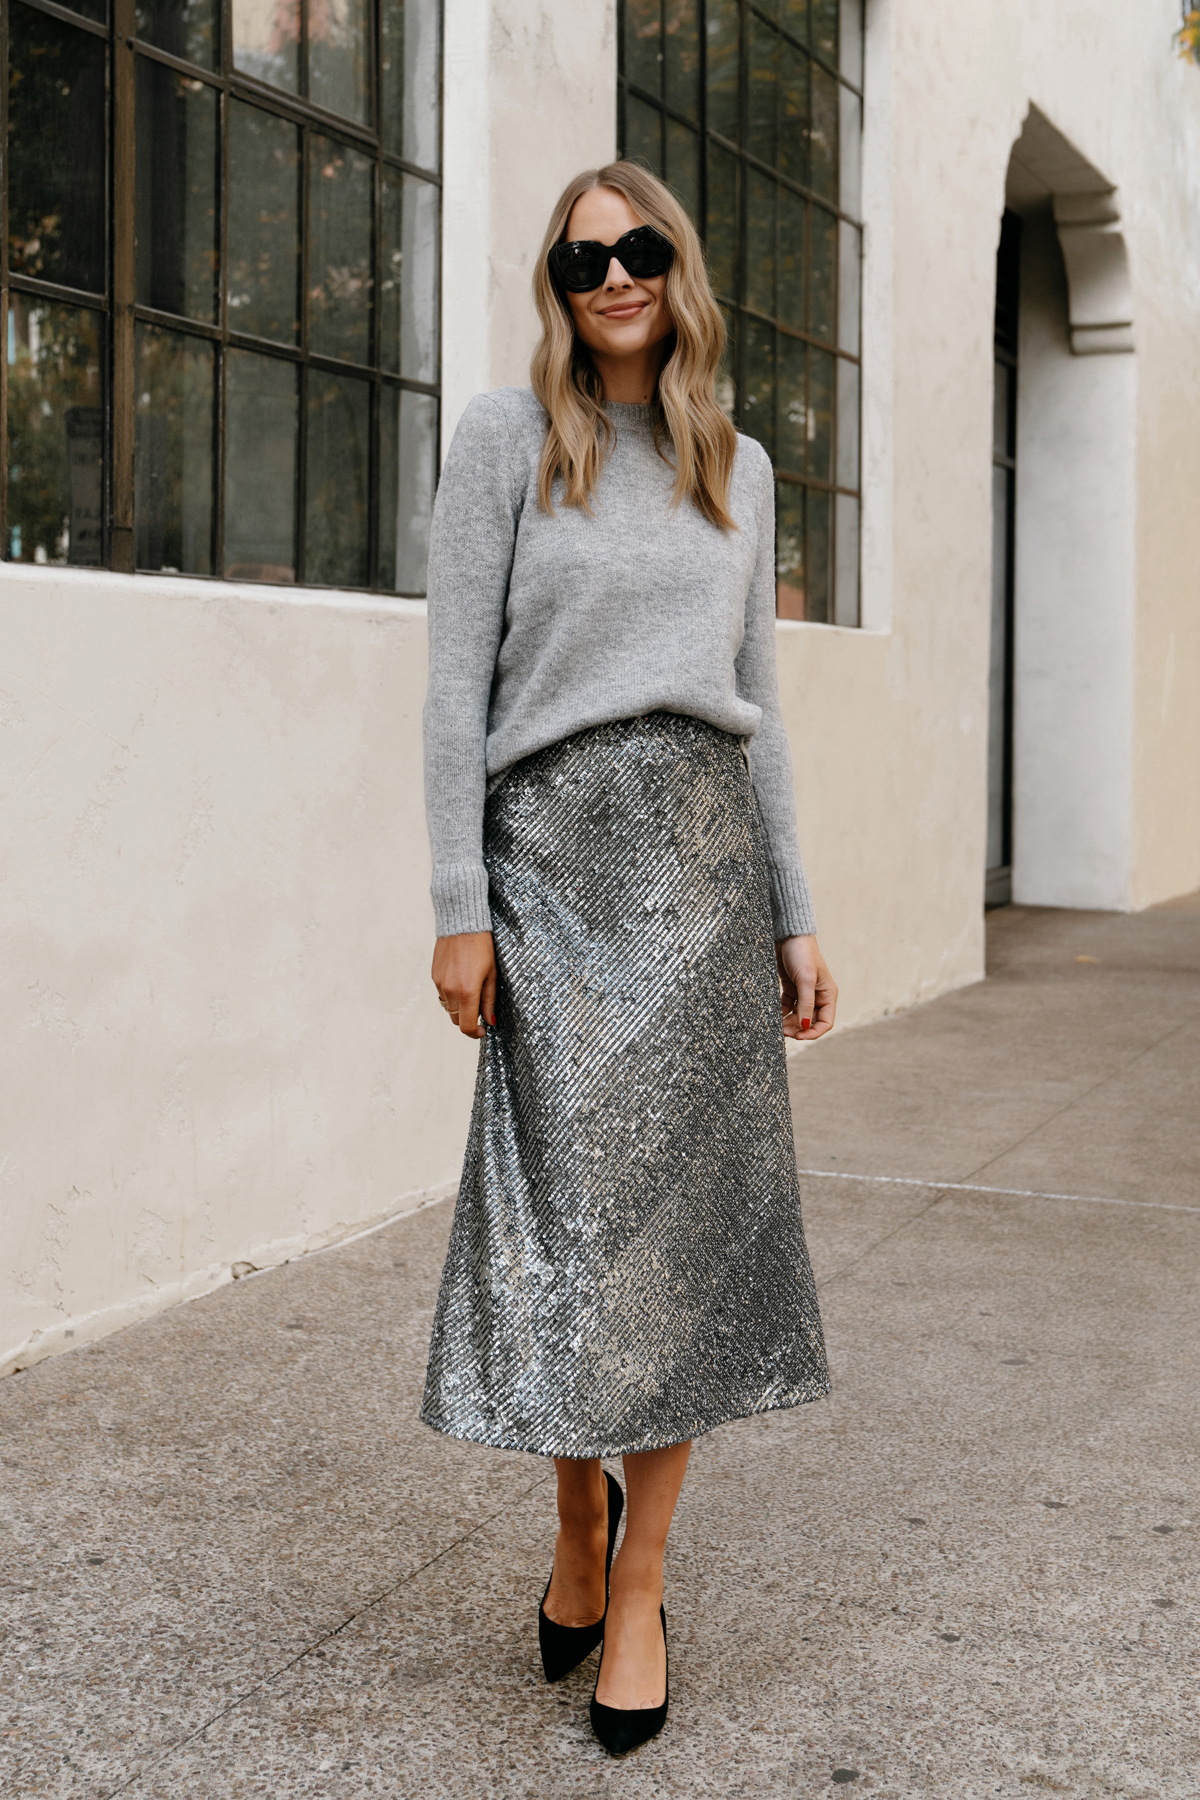 Fashion Jackson Wearing Ann Taylor Silver Sequin Skirt Outfit Grey Sweater Black Pumps Holiday Outfit 1